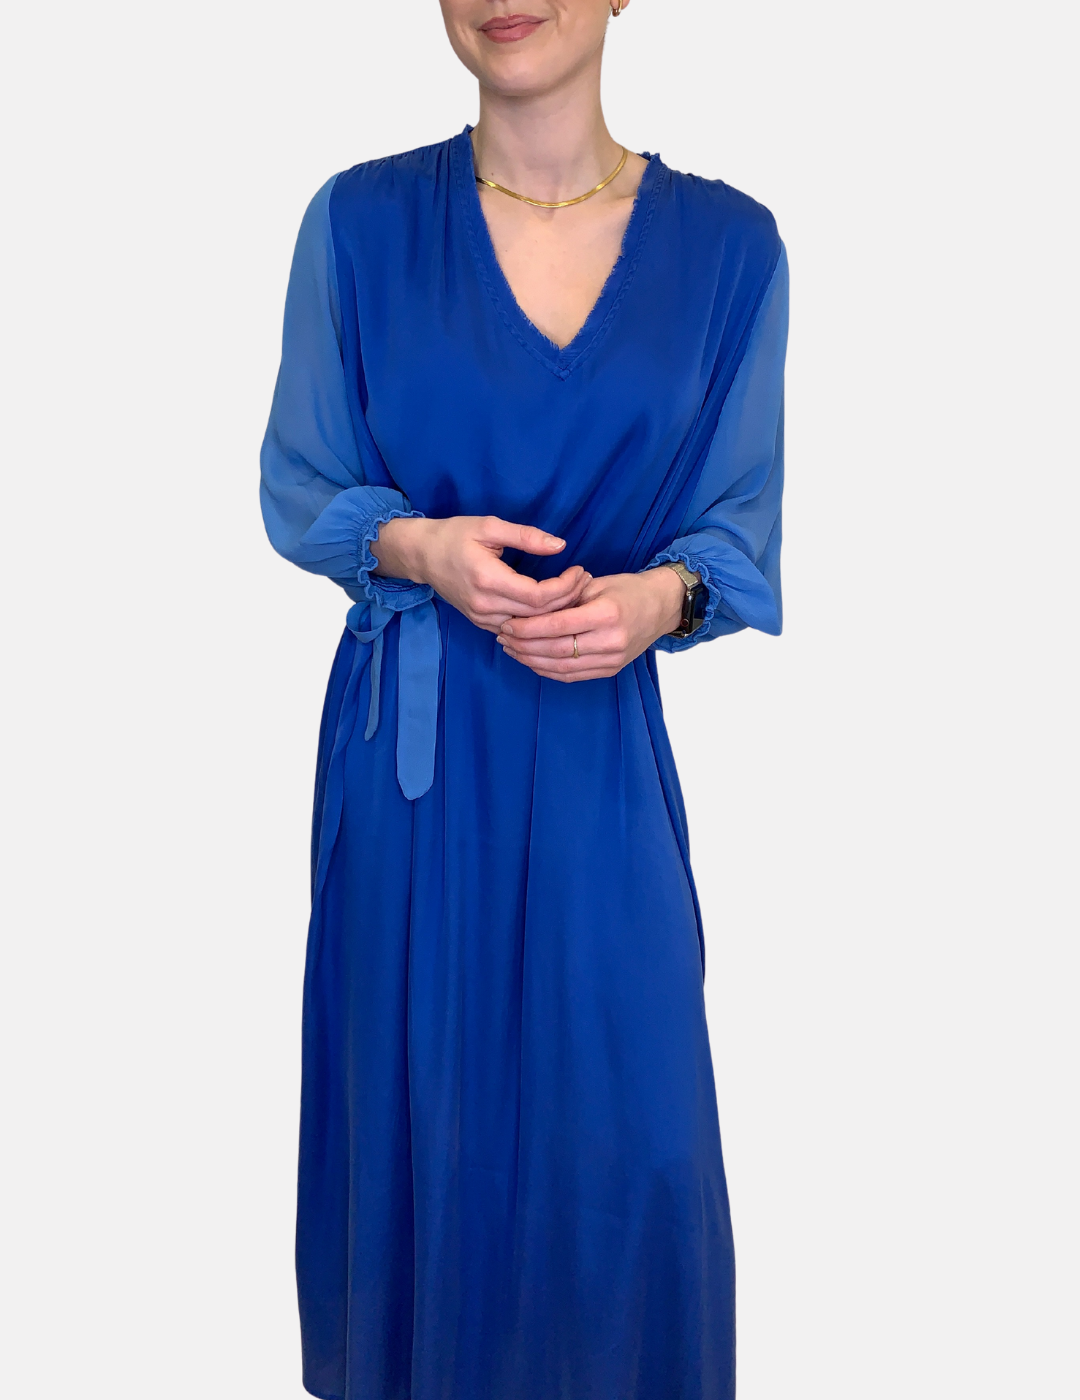 Electric blue dress in stretch silk with a sheer sleeve and a removable tie